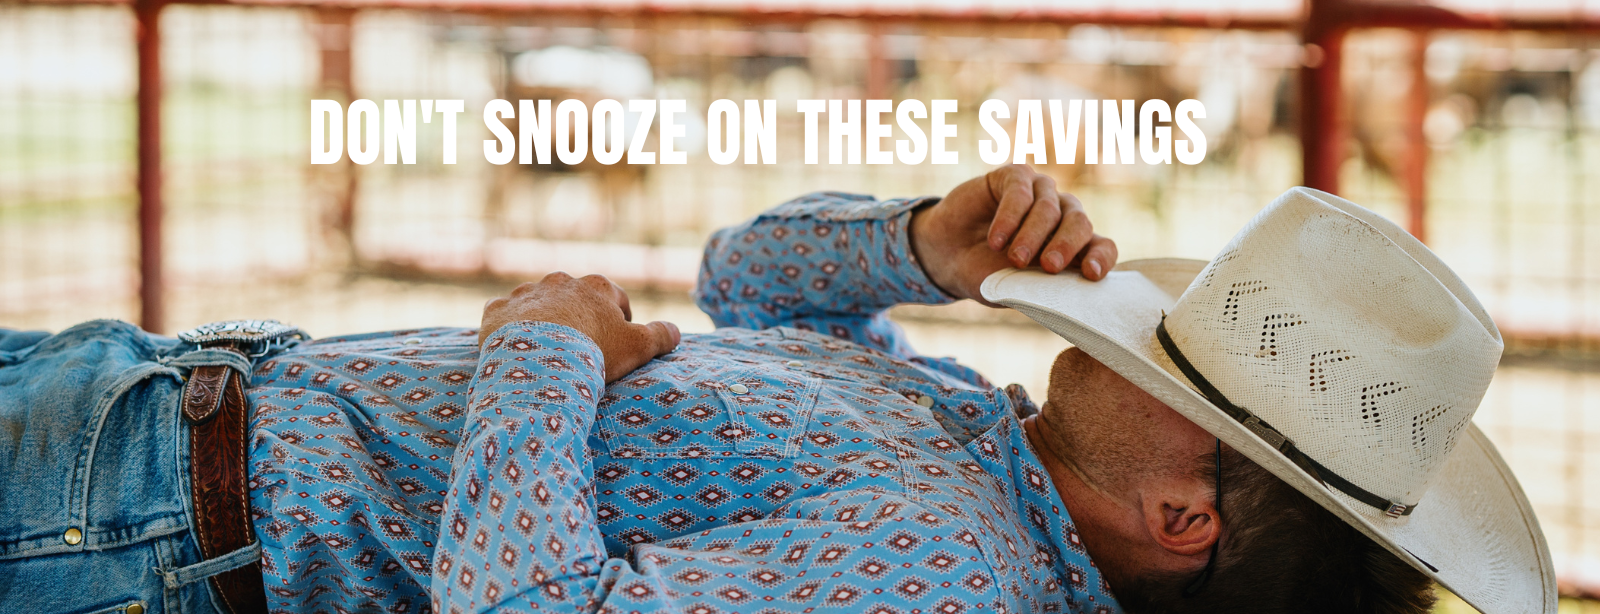 An image of a man laying down with a cowboy hat over his face with the words "don't snooze on these savings" above him.
